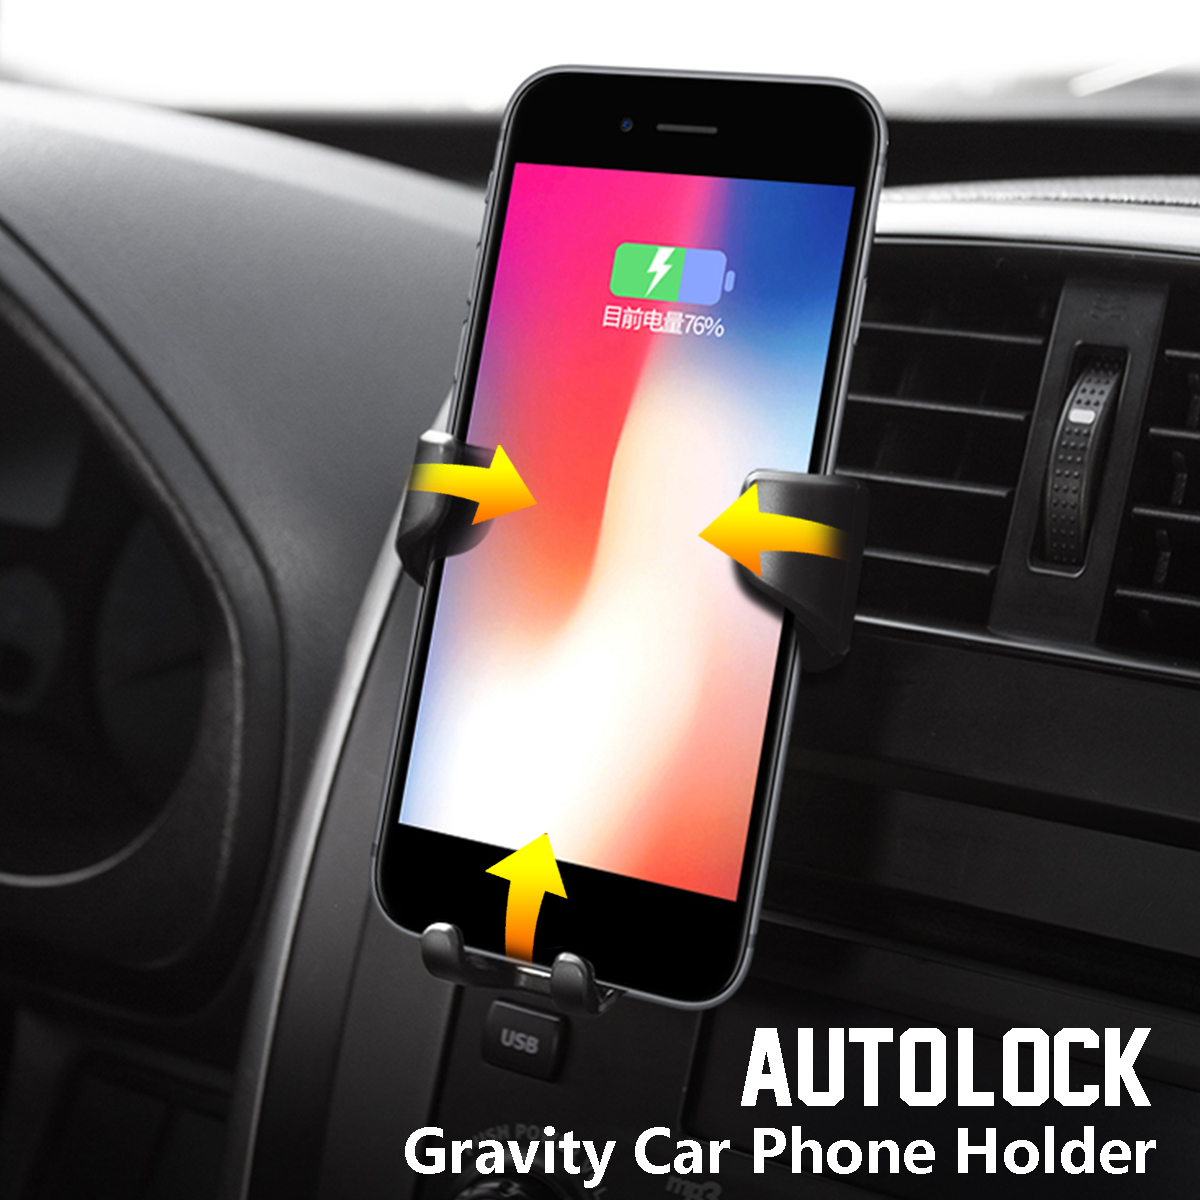 Universal-Gravity-Linkage-Auto-Lock-Car-Air-Vent-Mount-Dashboard-Holder-for-iPhone-Xiaomi-Mobile-Pho-1419383-1